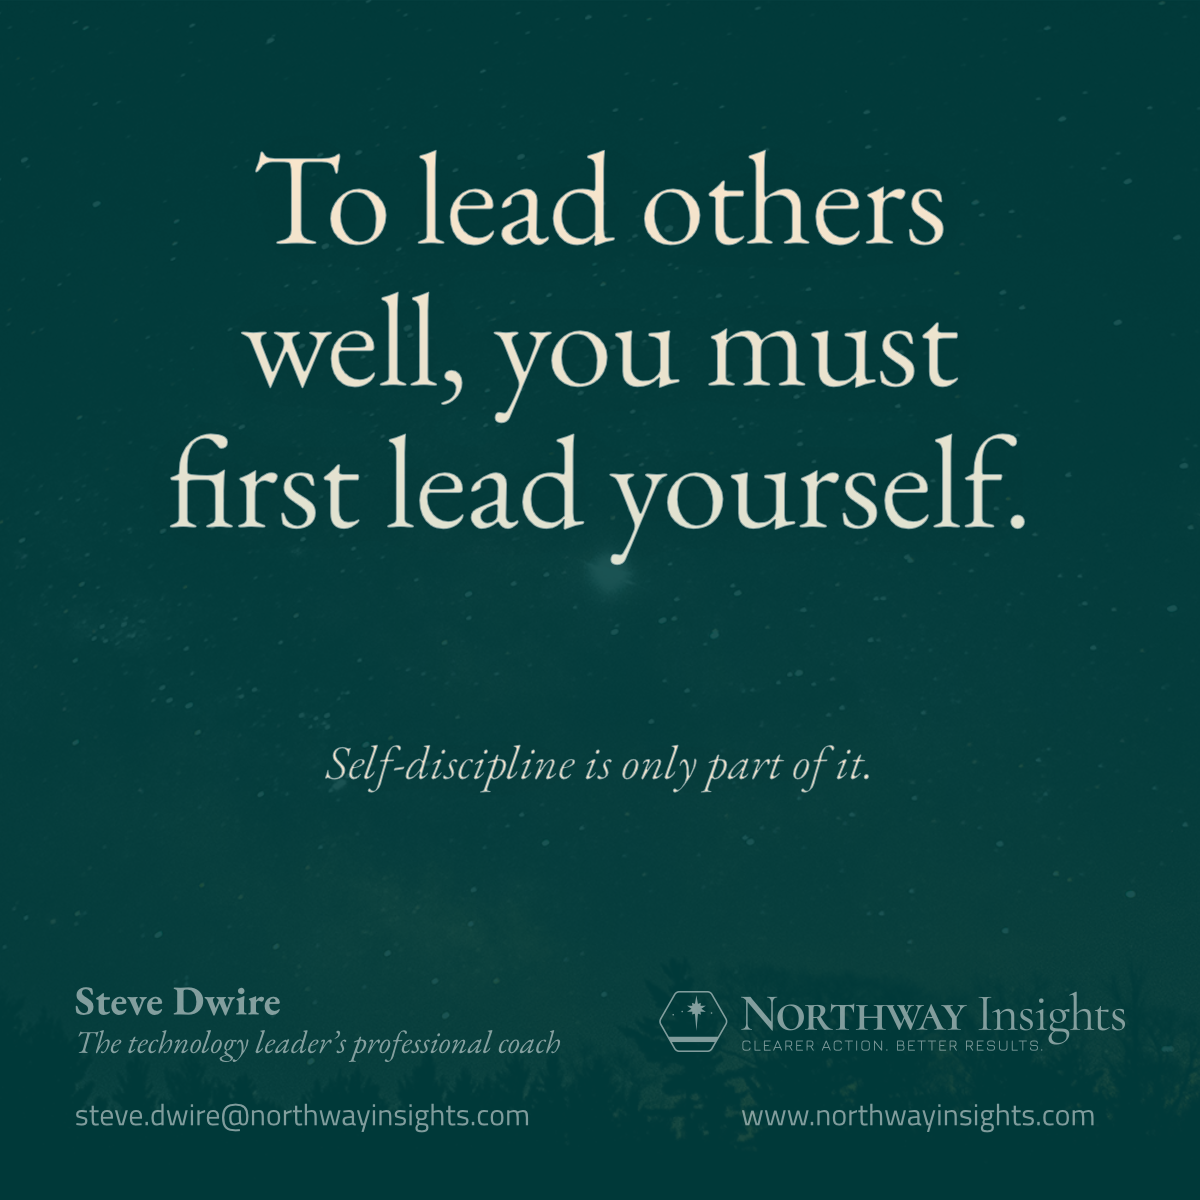 To lead others well, you must first lead yourself. (Self-discipline is only part of it.)